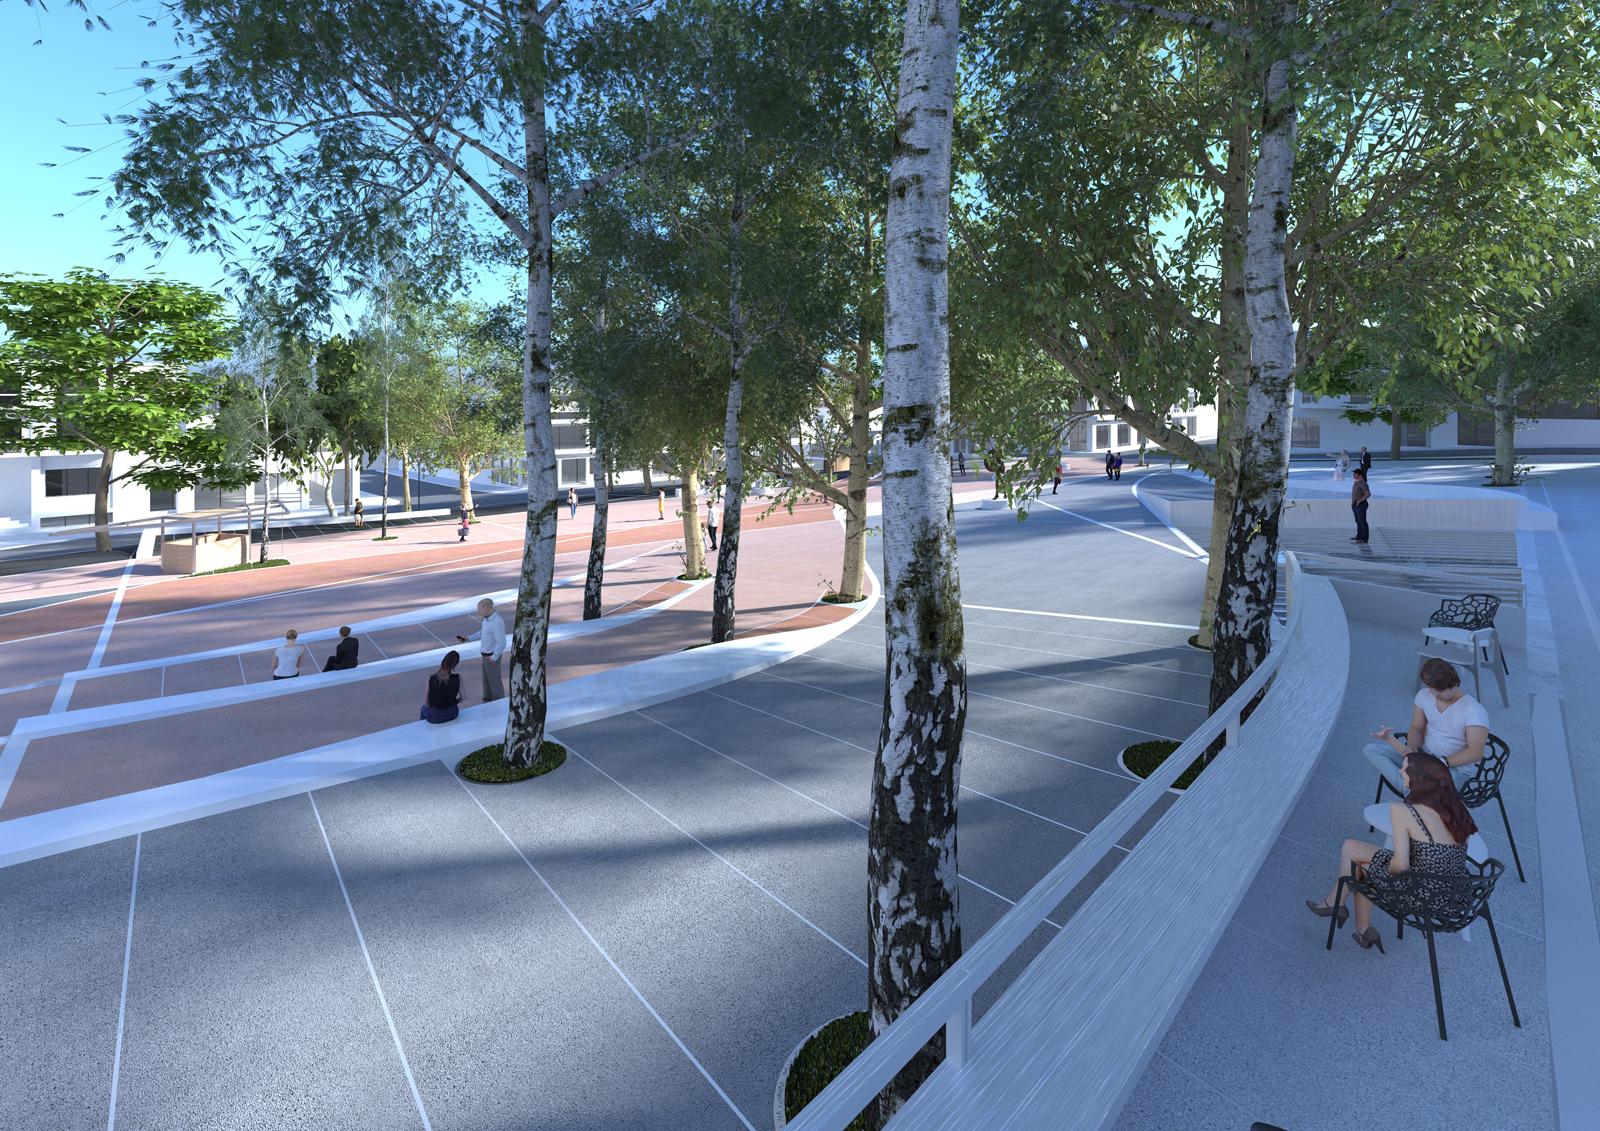 Archisearch Riverborn Square: Land n Arch wins 1st prize in the architectural competition for the redesign of Farsala square.